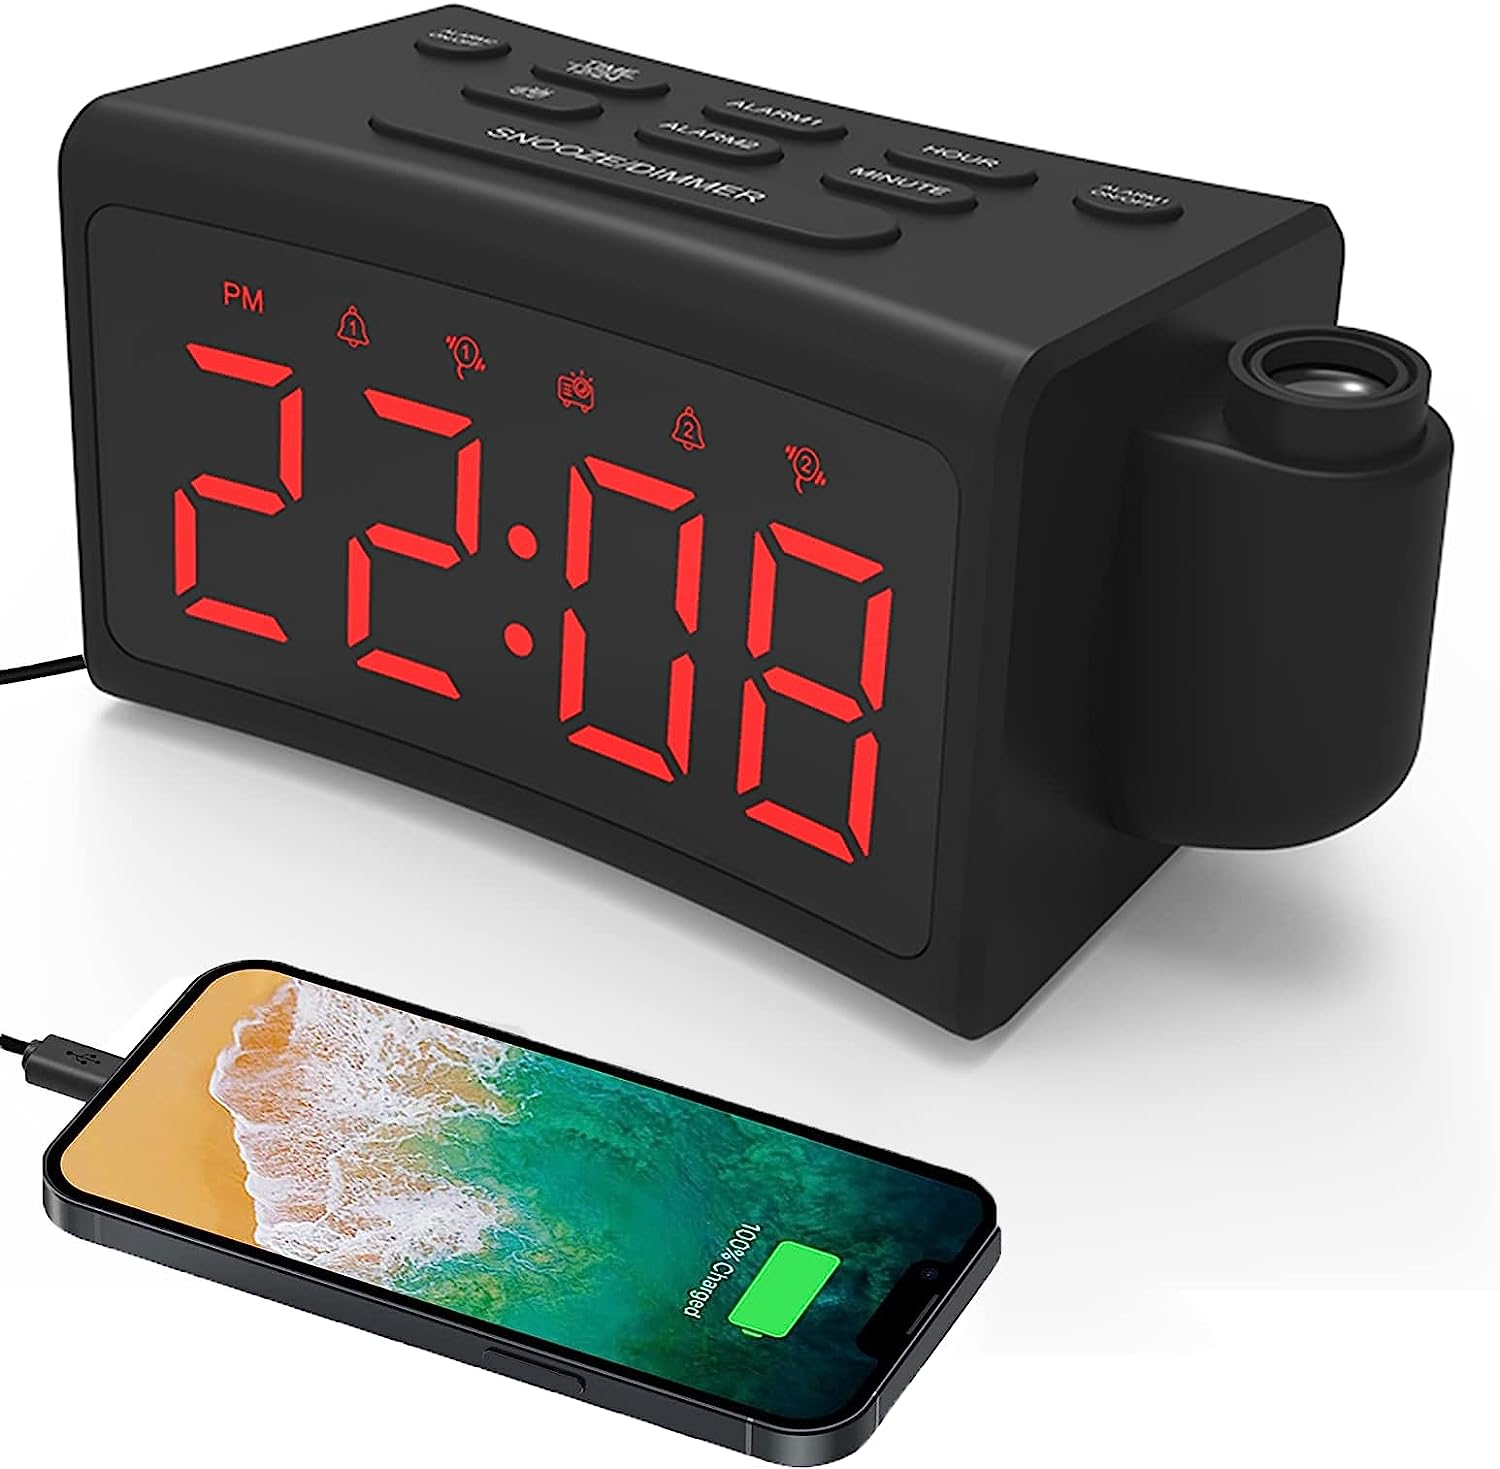 GING YHAU Projection Alarm Clock for Bedroom,LED [...]